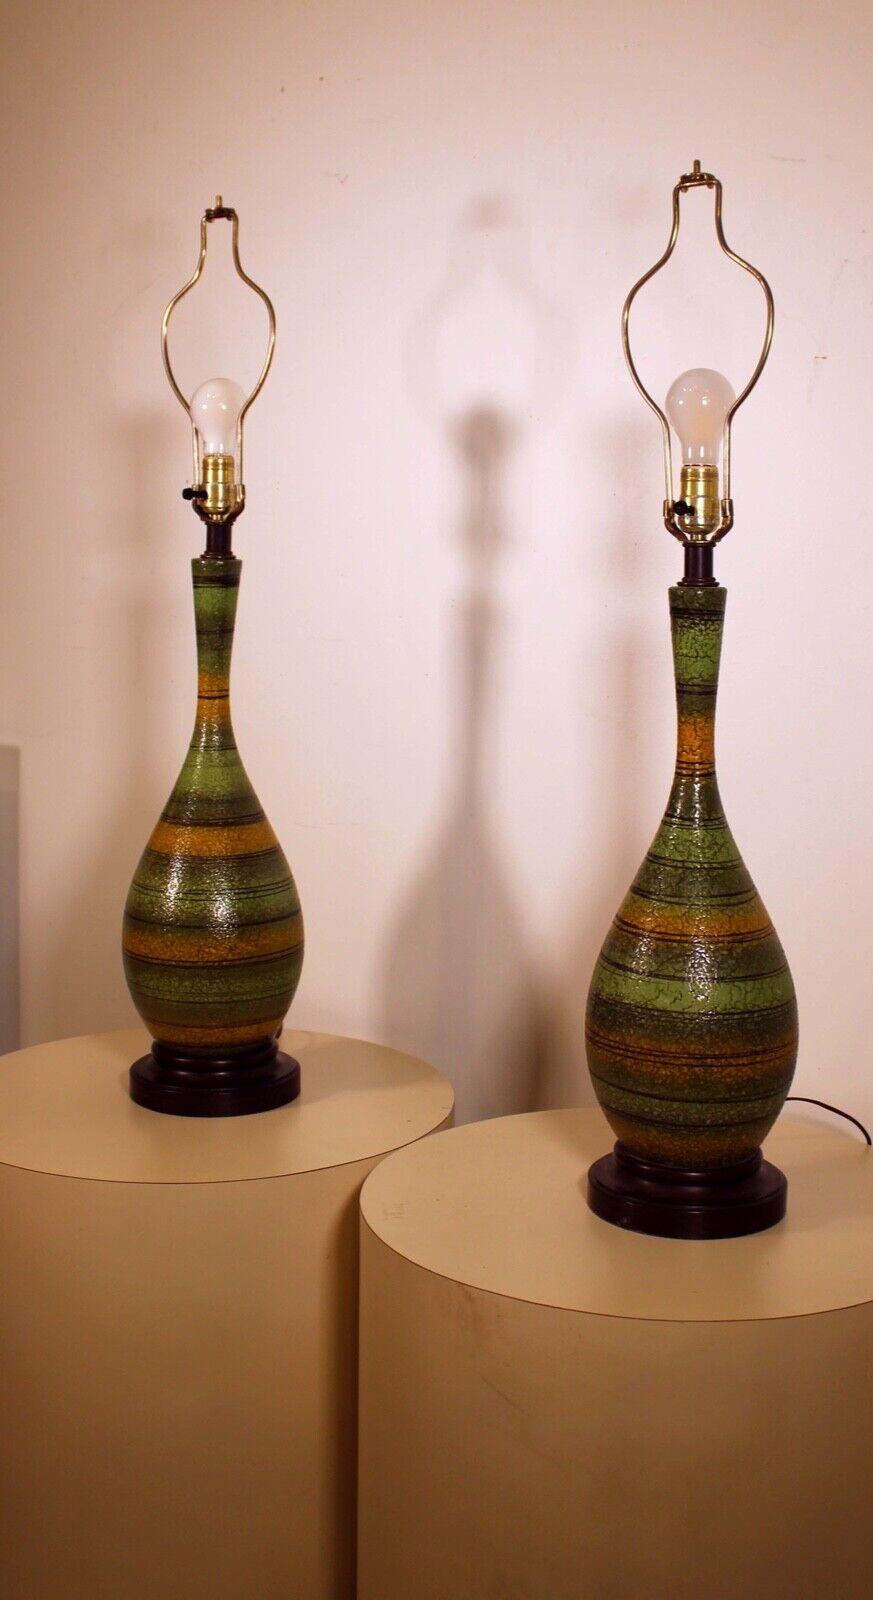 A lovely pair of green Mid-Century Modern striped ceramic lamps with wood base. In very good condition. Dimensions: 7.5